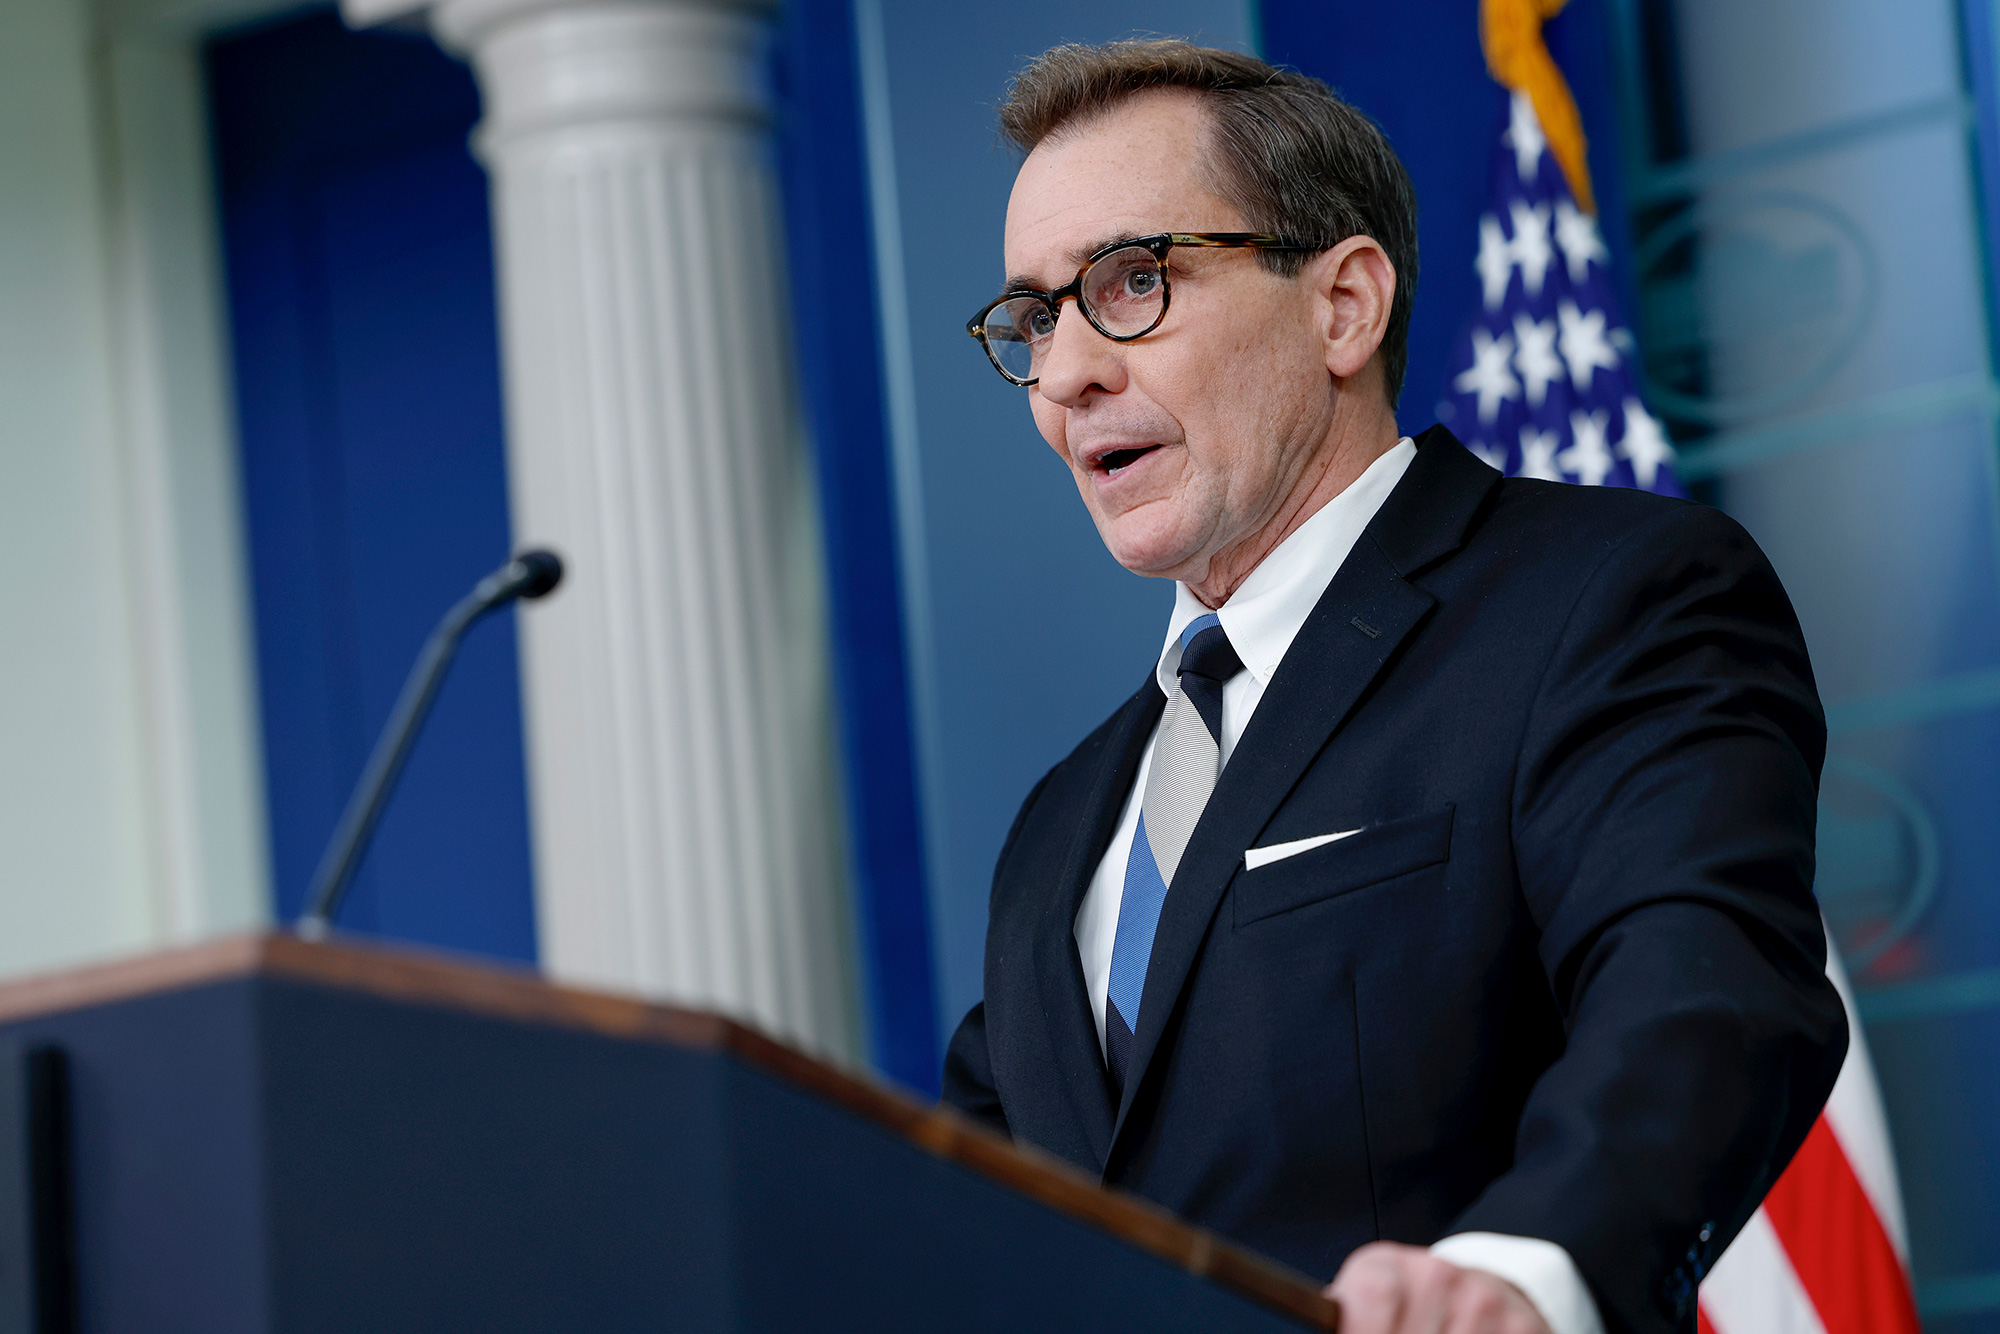 White House National Security Communications Advisor John Kirby speaks during a press briefing at the White House in Washington, DC, on February 15.